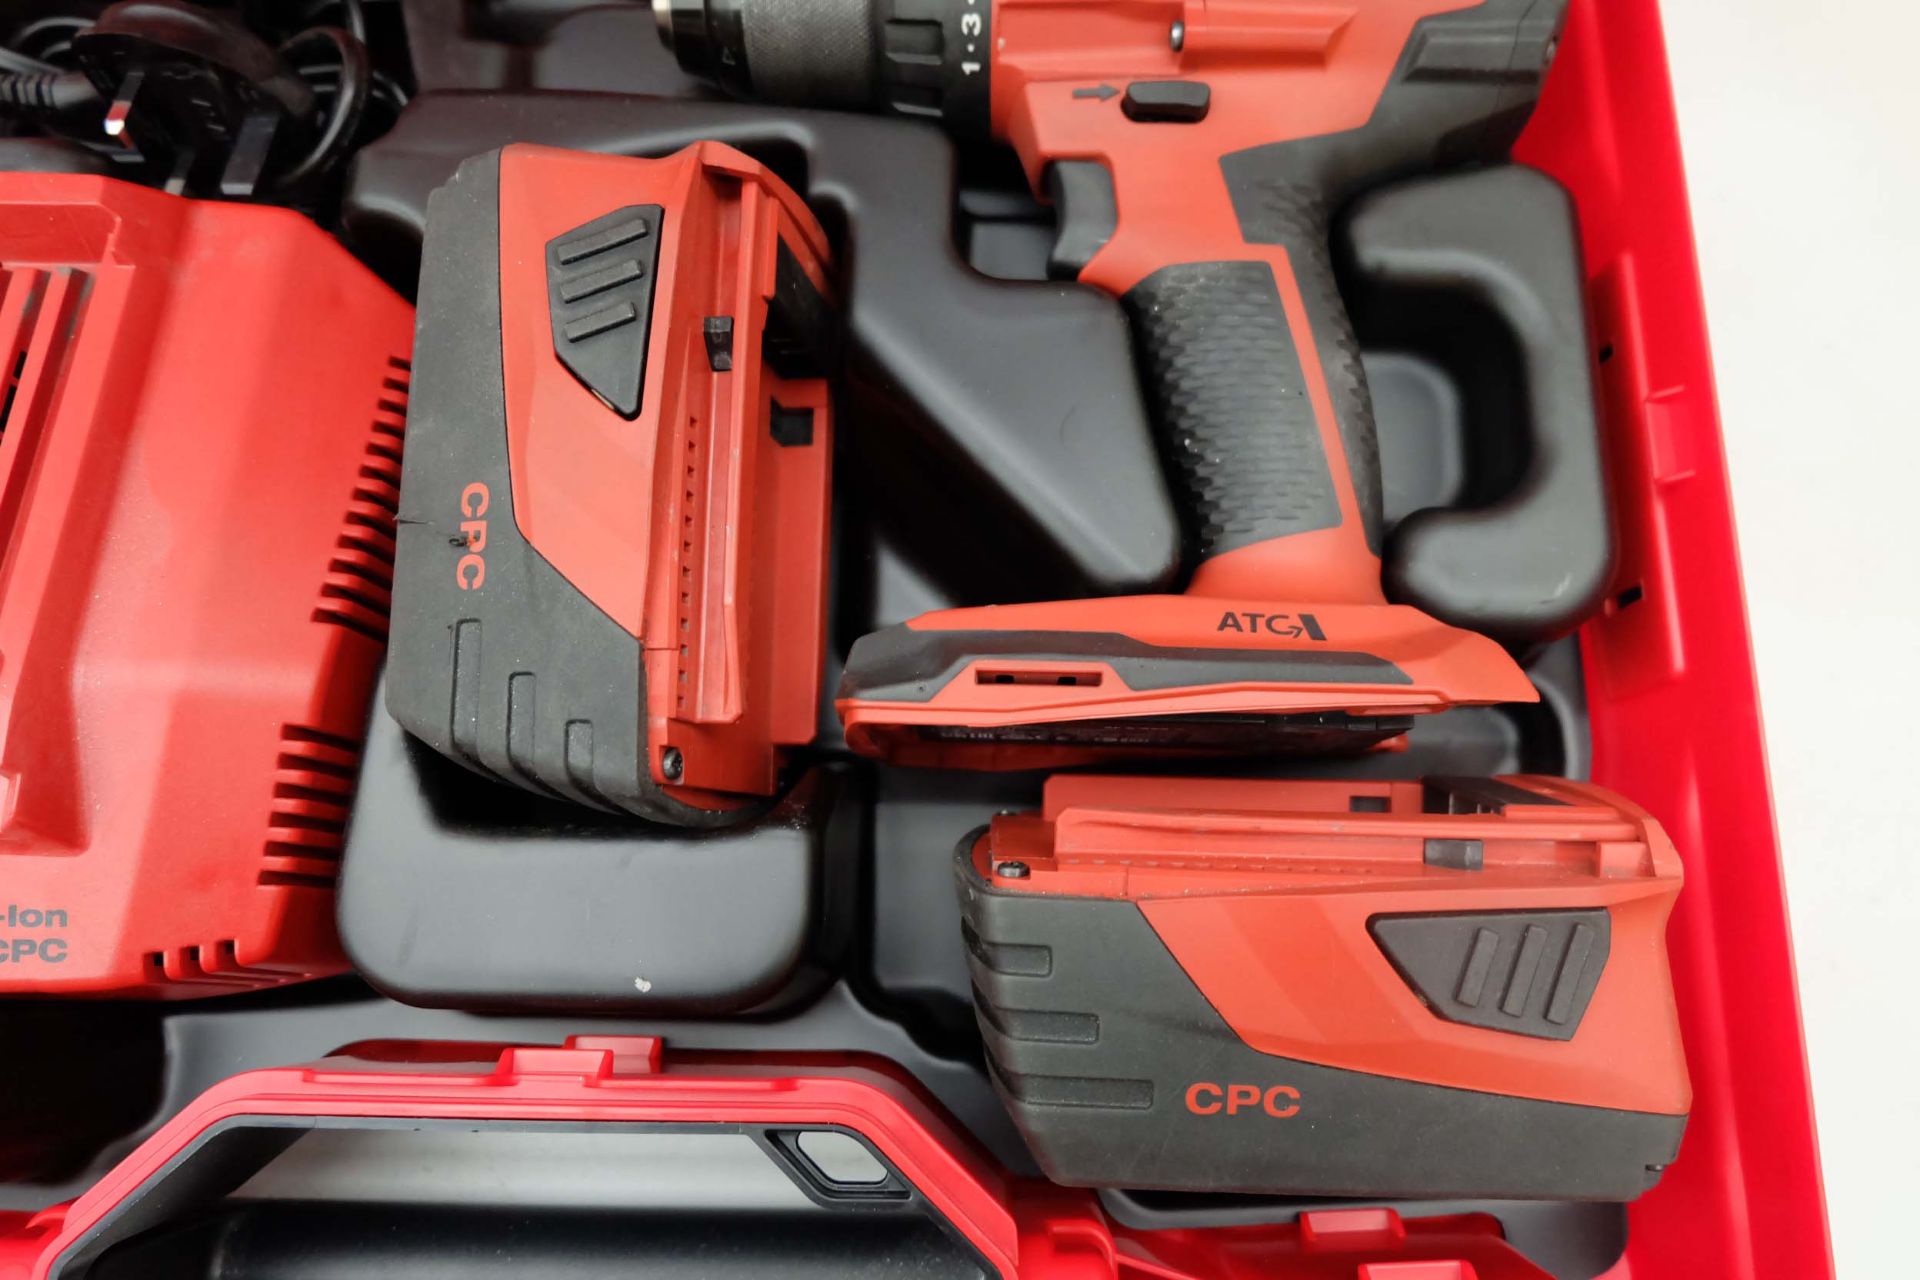 Hilti Model SF 6-A22 Cordless Power Drill. 2 x 22V 5.2Ah Batteries. 240V Charger. - Image 3 of 8